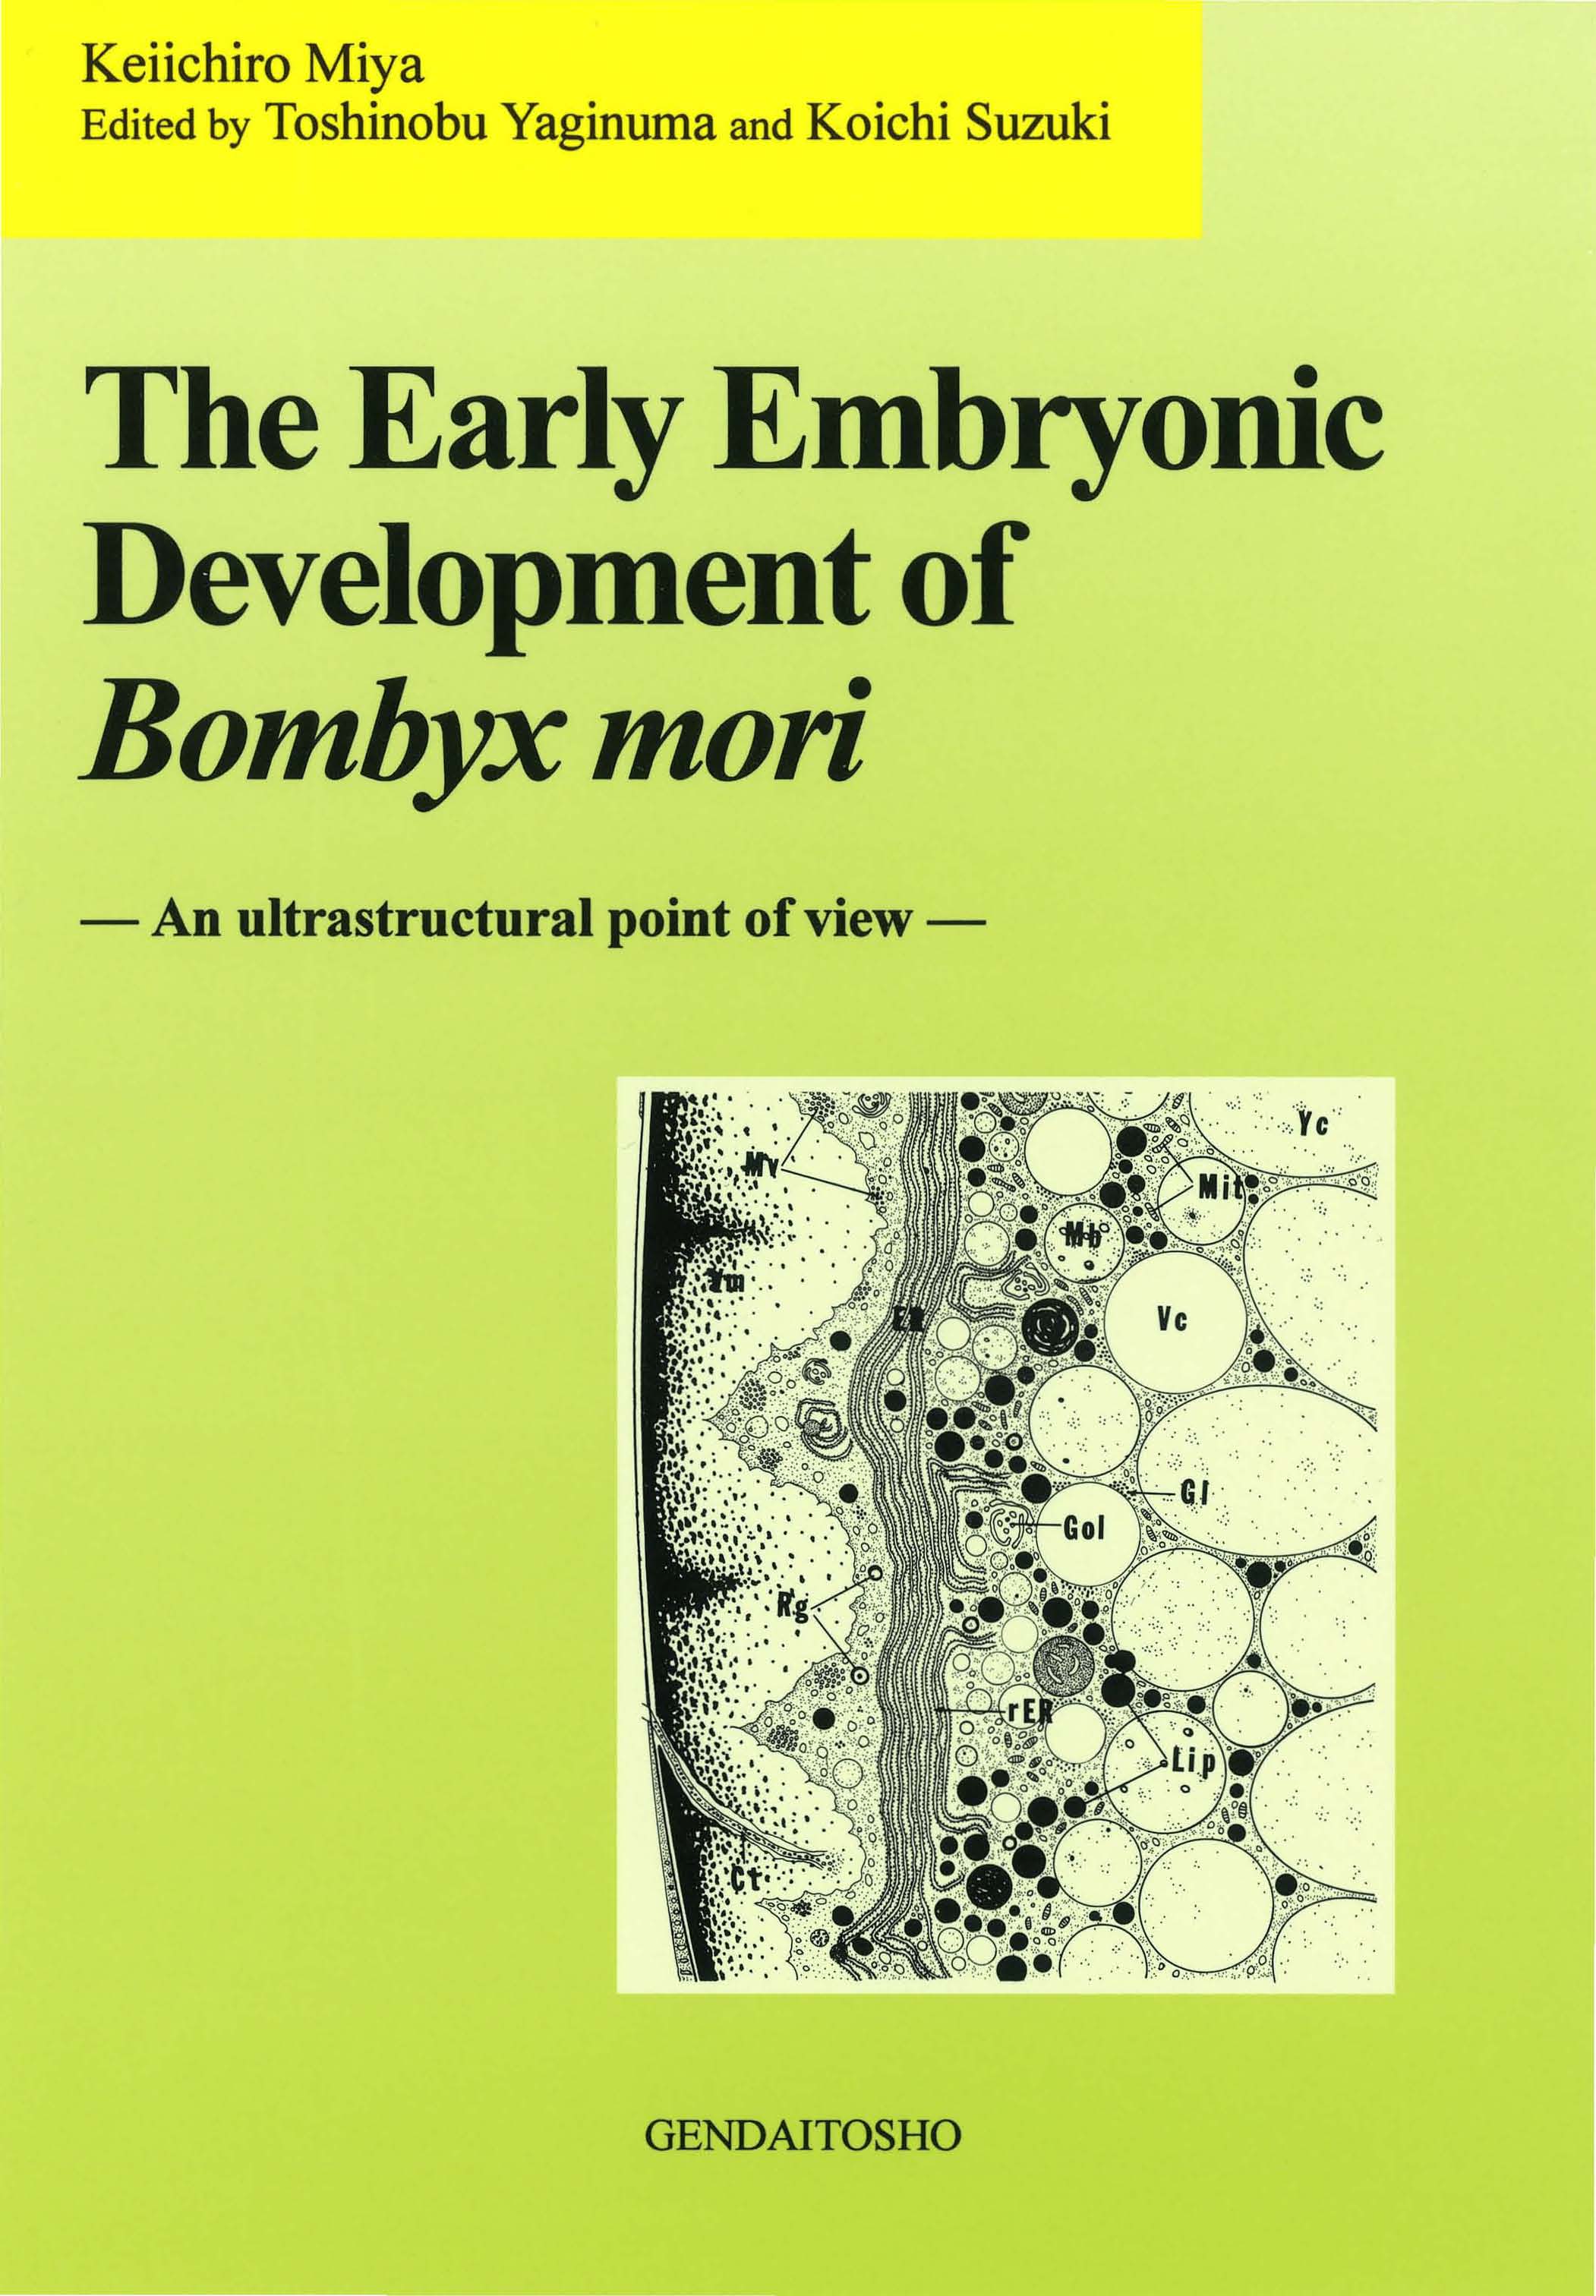 The Early Embryonic Development of Bombyx mori